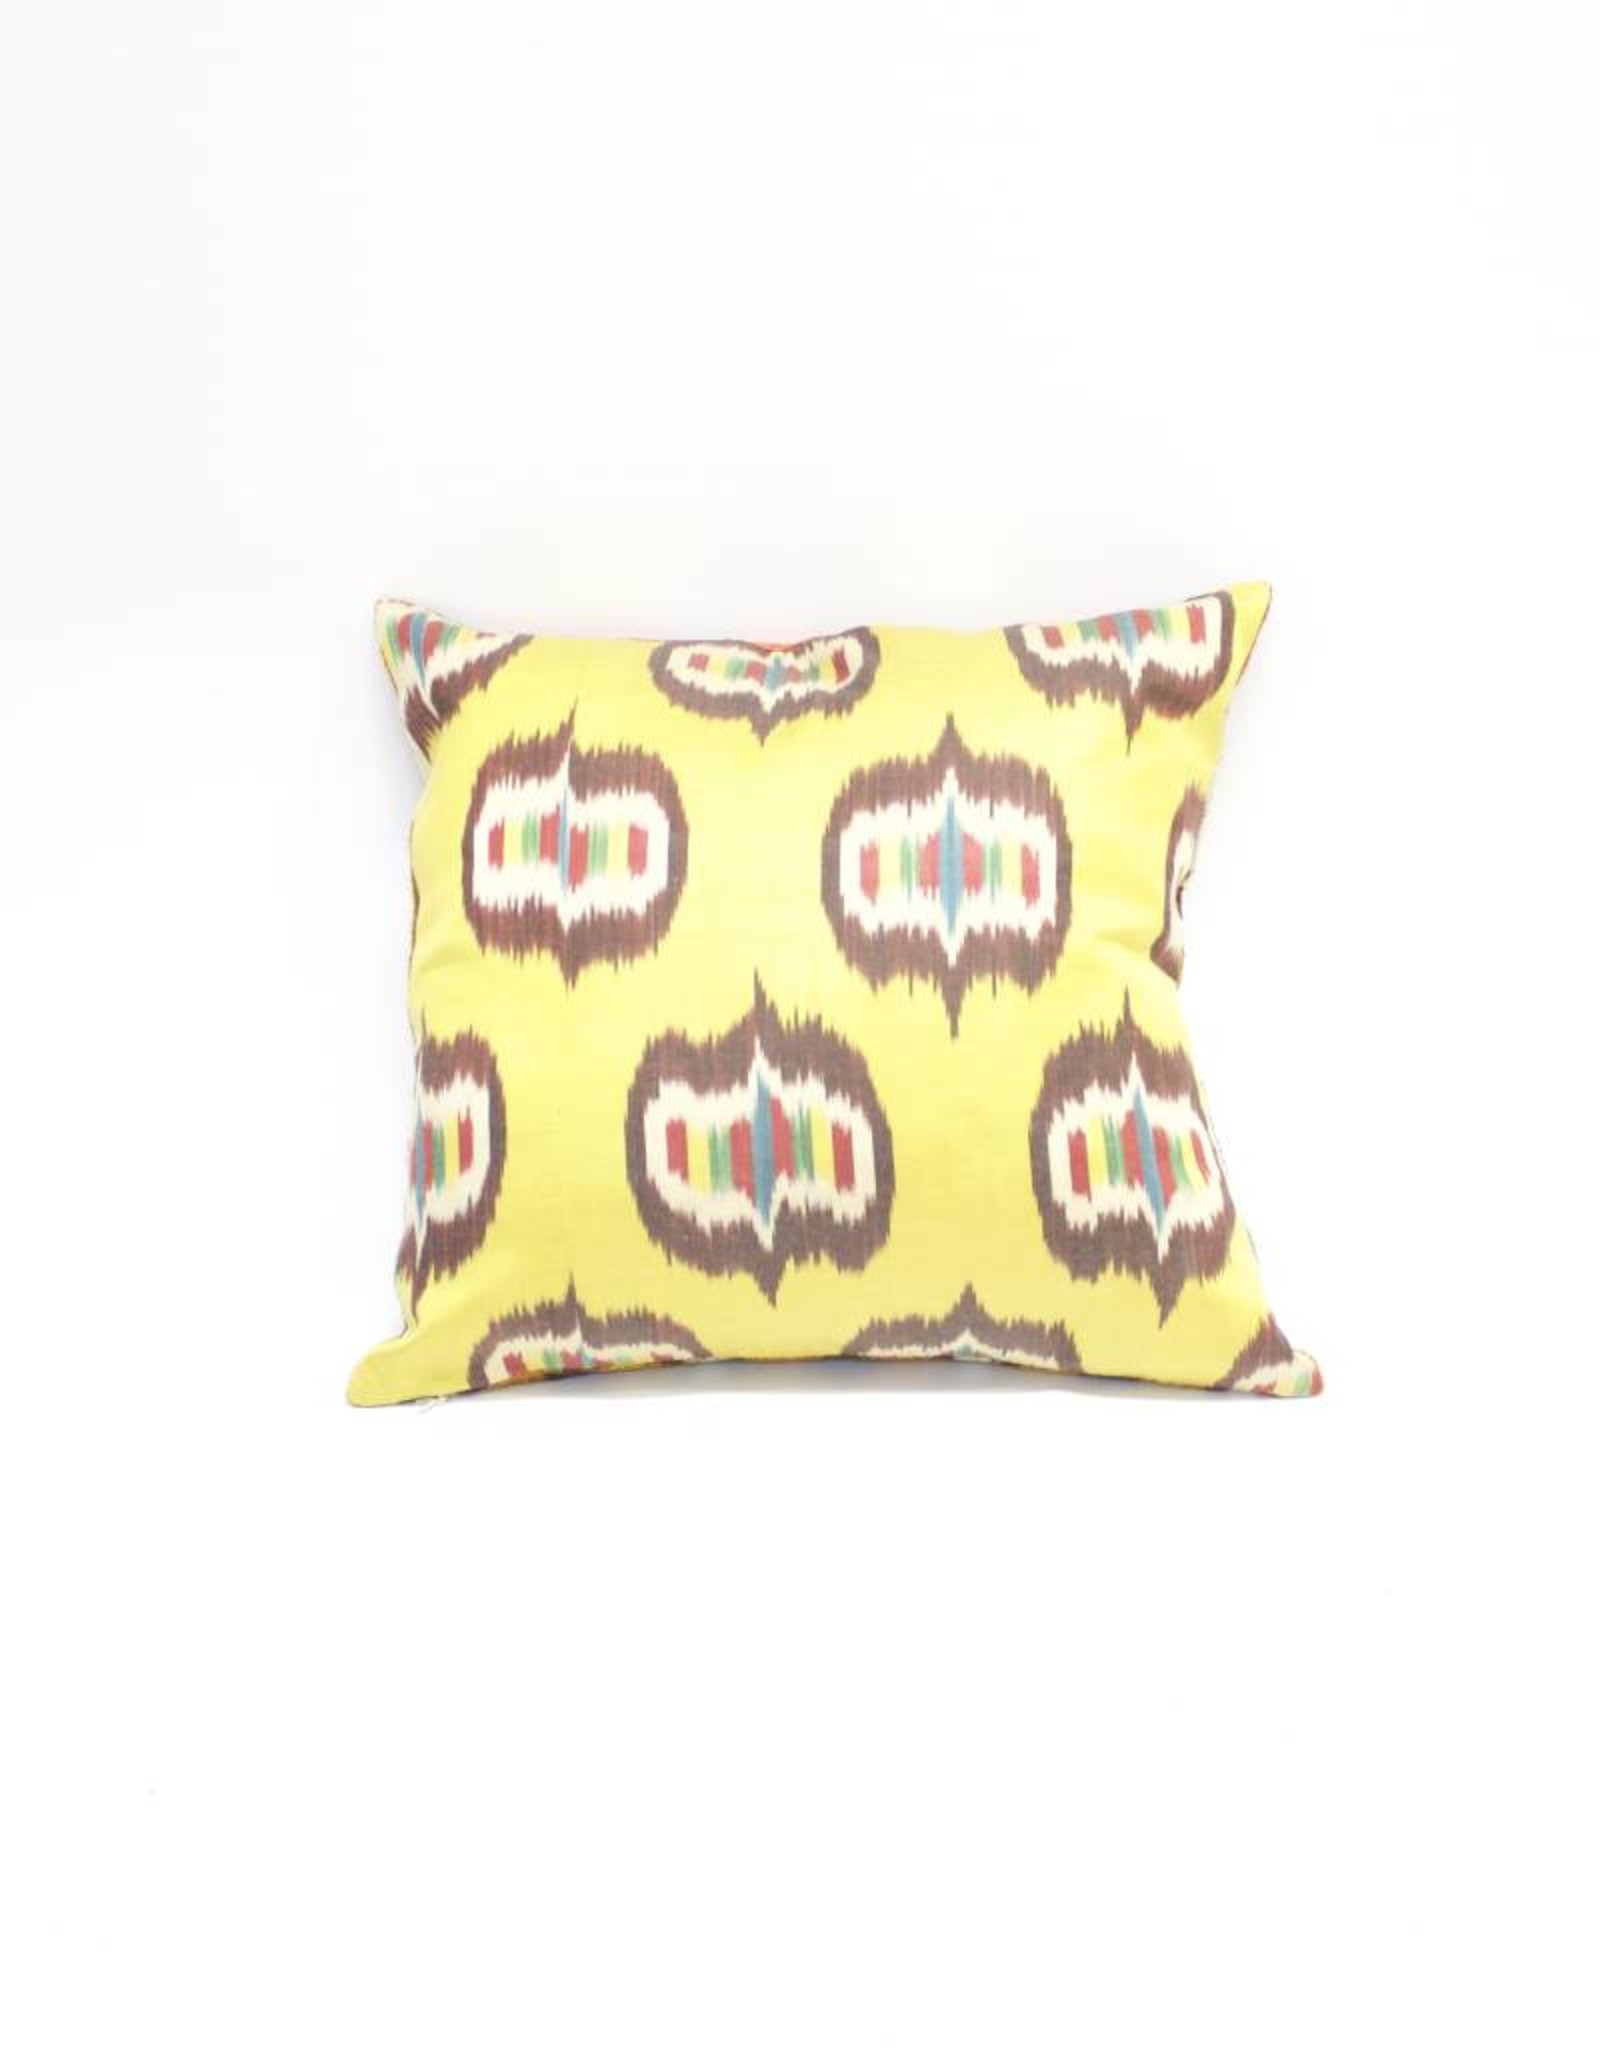 Tasdemir Rugs Ikat Silk Double-Sided Pillow - Square